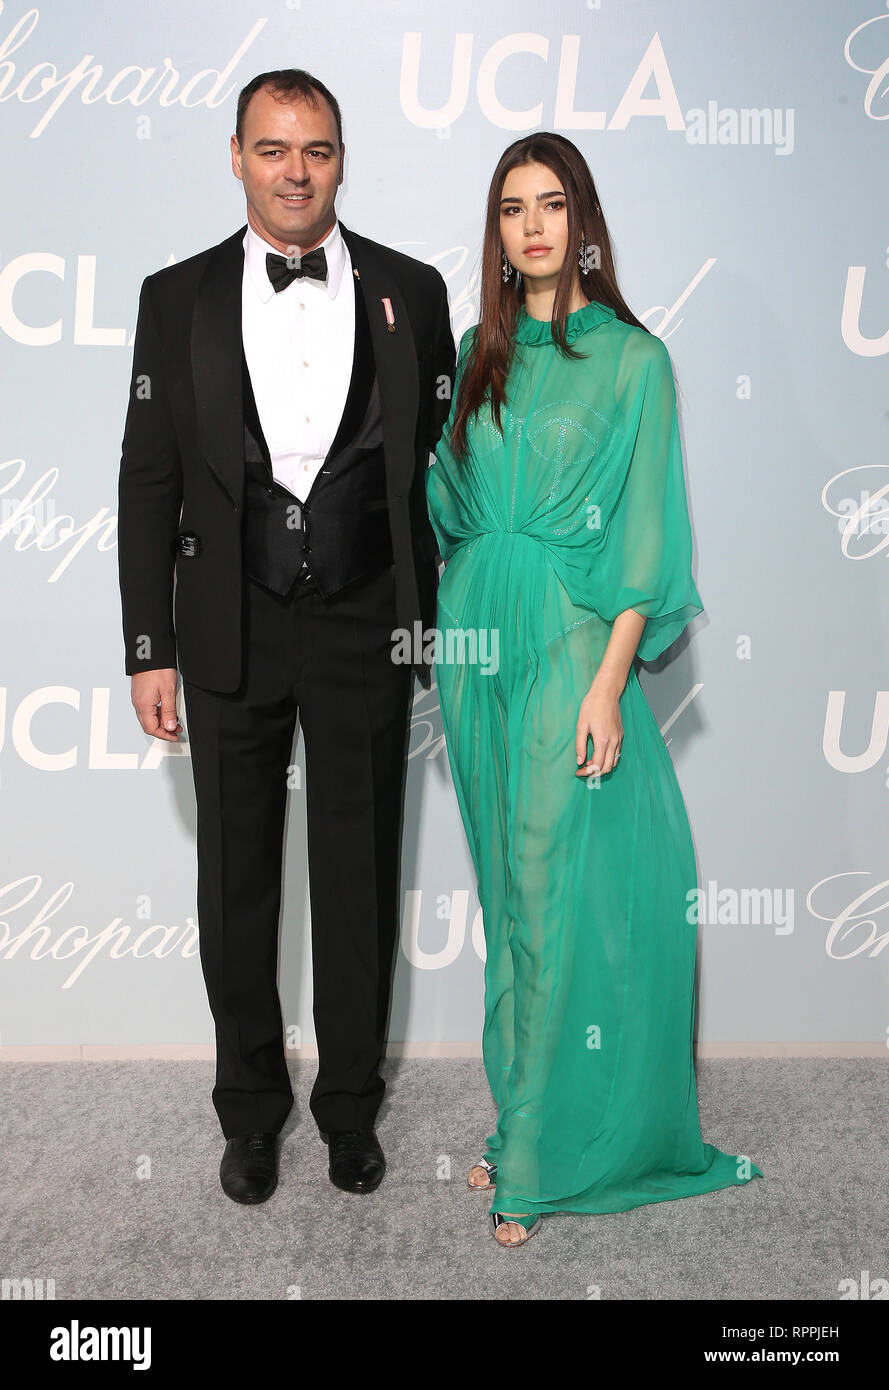 Los Angeles, California, USA. 21st Feb, 2019. 21 February 2019 - Los Angeles, California - Helena Gatsby. 2019 Hollywood For Science Gala held at a private residence. Photo Credit: Faye Sadou/AdMedia Credit: Faye Sadou/AdMedia/ZUMA Wire/Alamy Live News Stock Photo